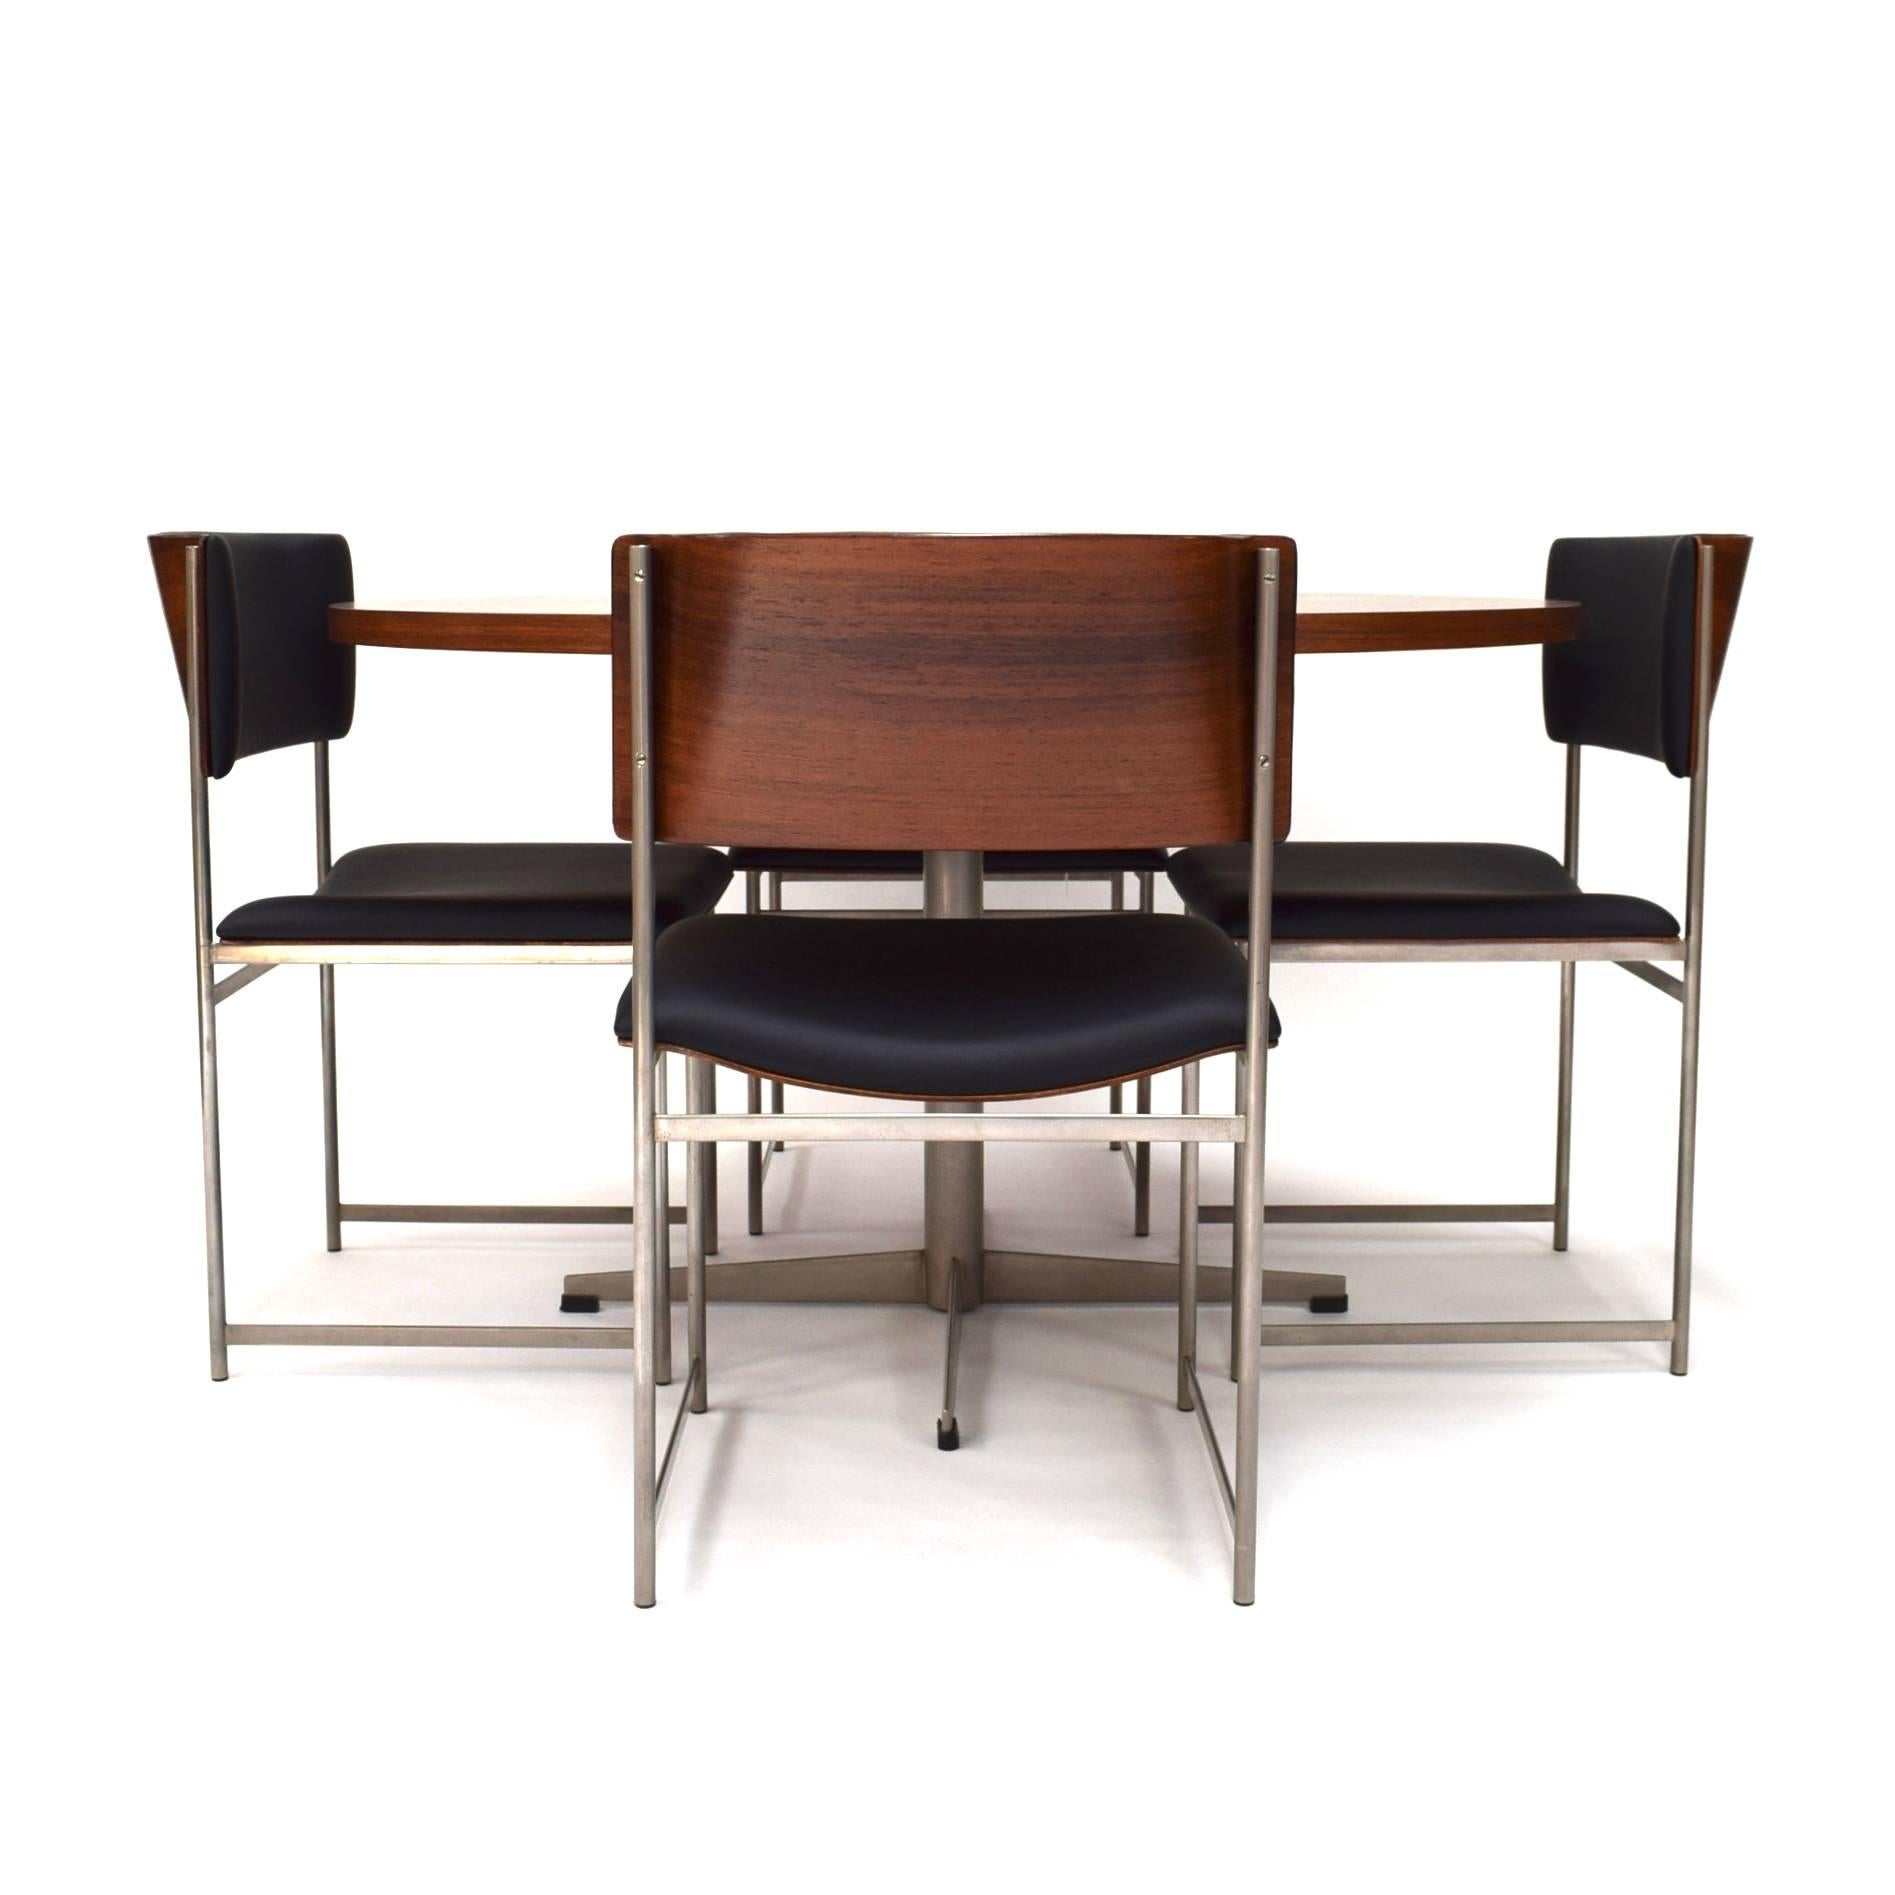 Gorgeous and rare Brazilian rosewood (Rio palissander) model SM-08 dining set by Cees Braakman.
The backs and seats are made of Brazilian rosewood molded plywood.
The chairs have been re-upholstered in high quality black faux leather.

The